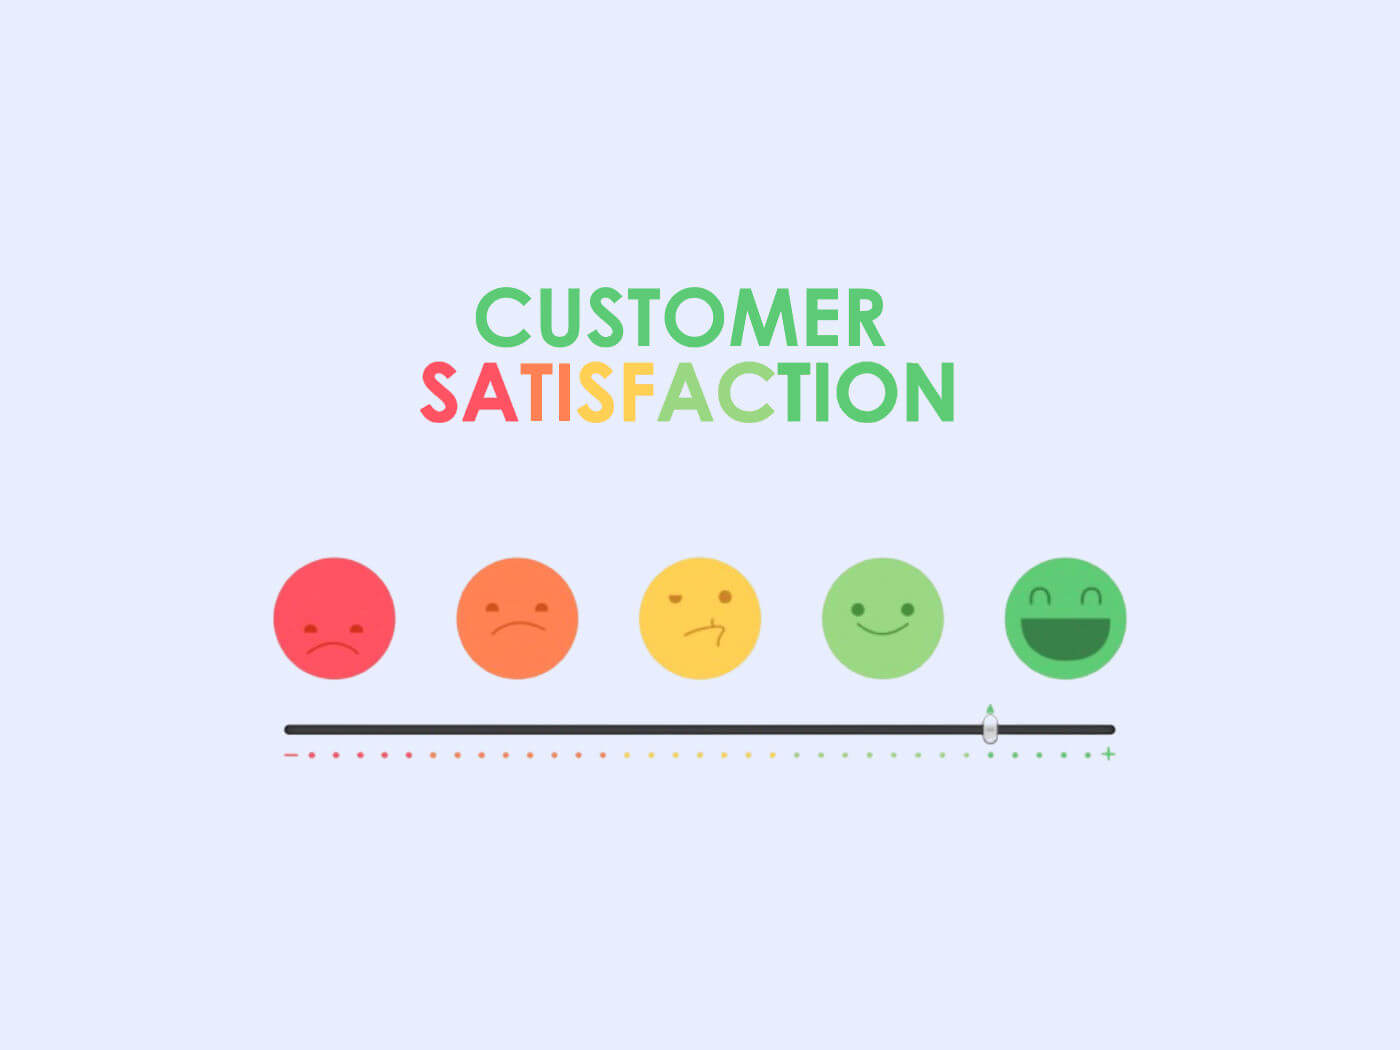 Satisfied Customer Images